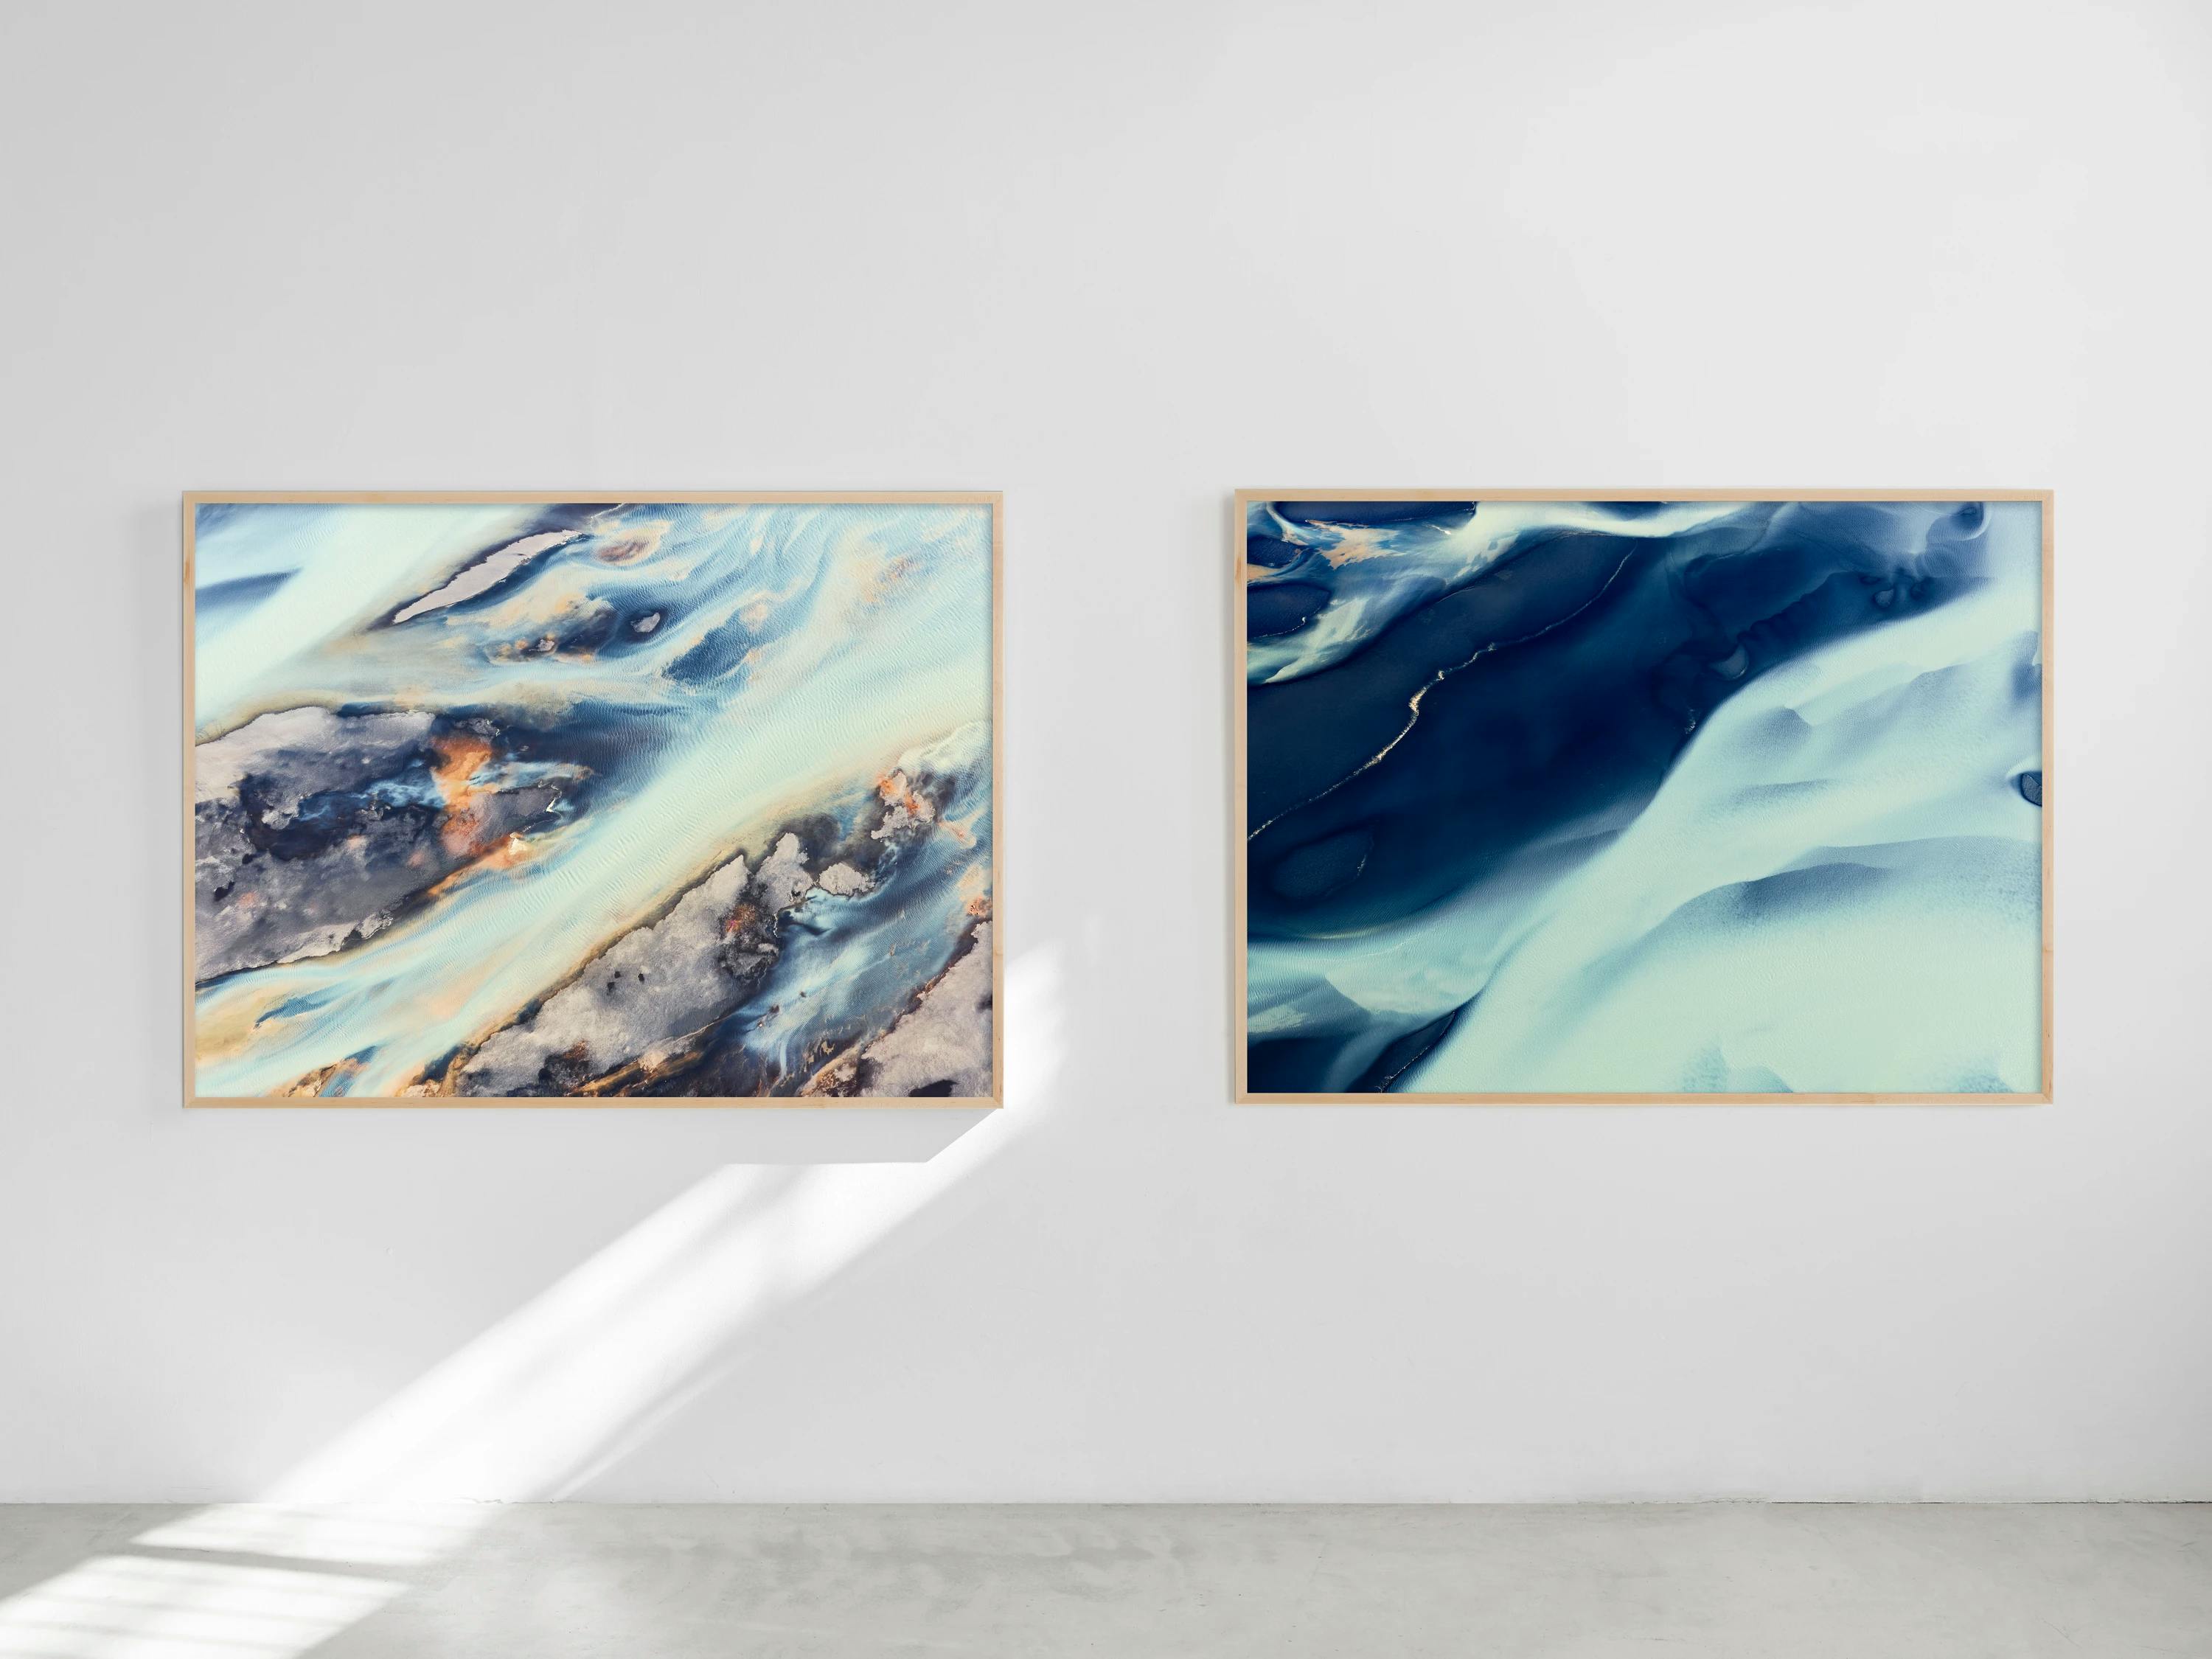 Two photographs of Icelandic rivers by Brooke Holm displayed in gallery